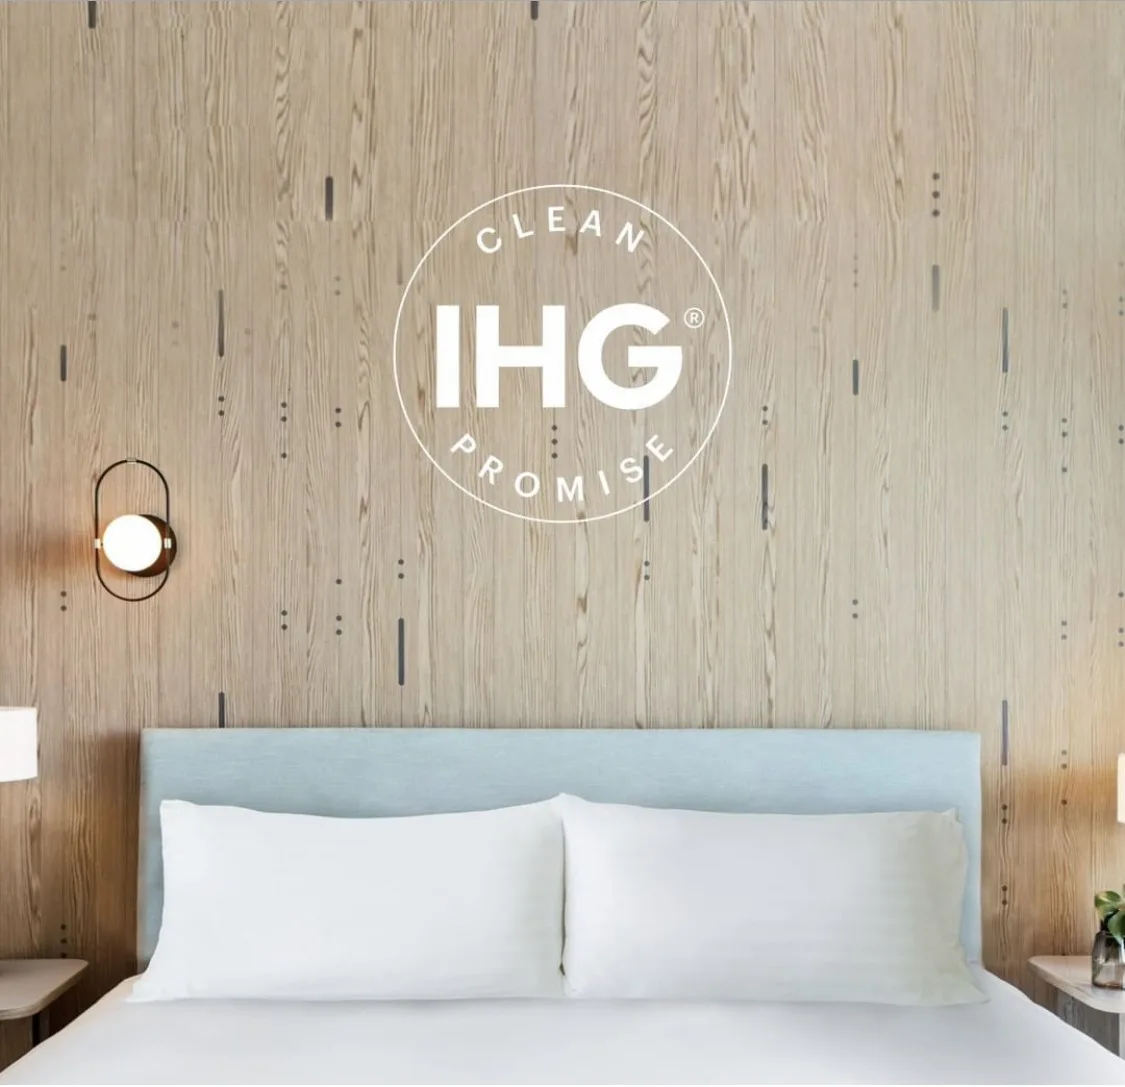 IHG Clean Promise : ready to receive you safely